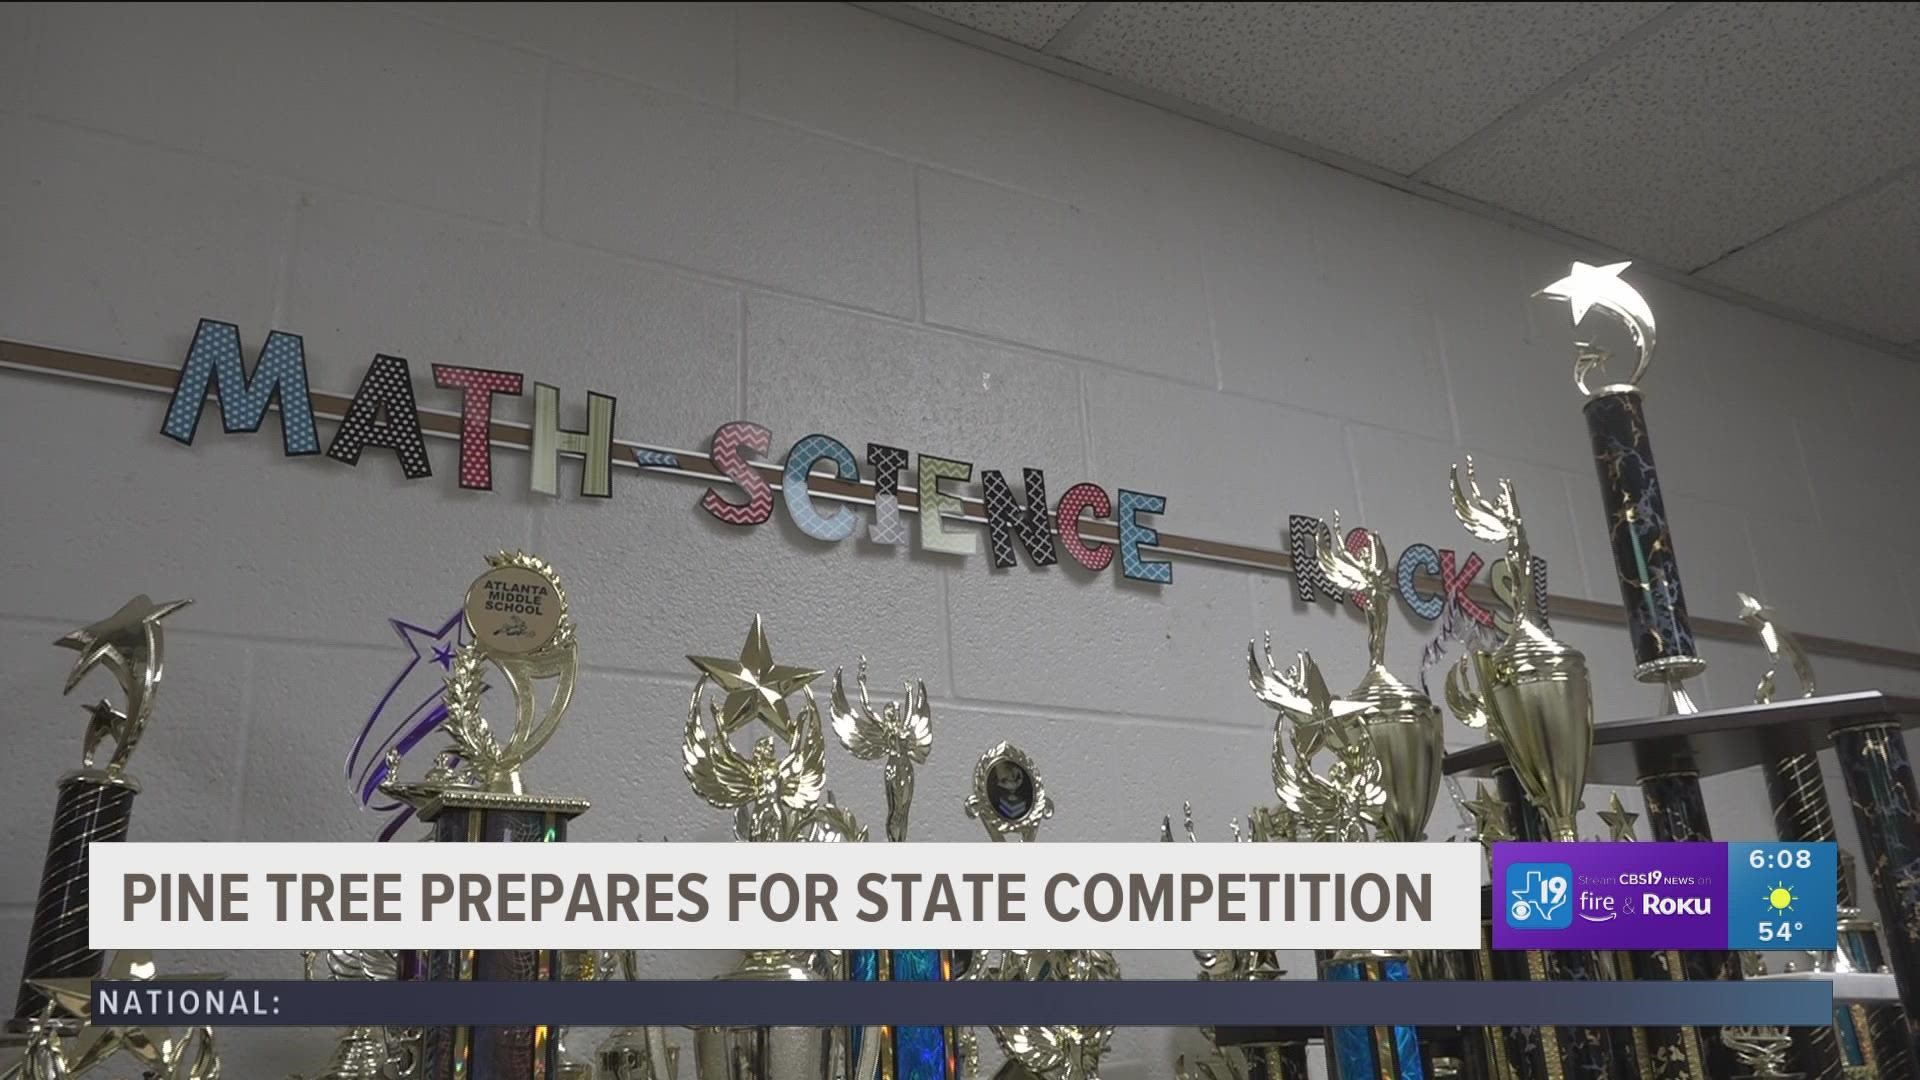 Math and science coach Michelle Randall is preparing a group of students to compete in the state math and science competition set for April 1.